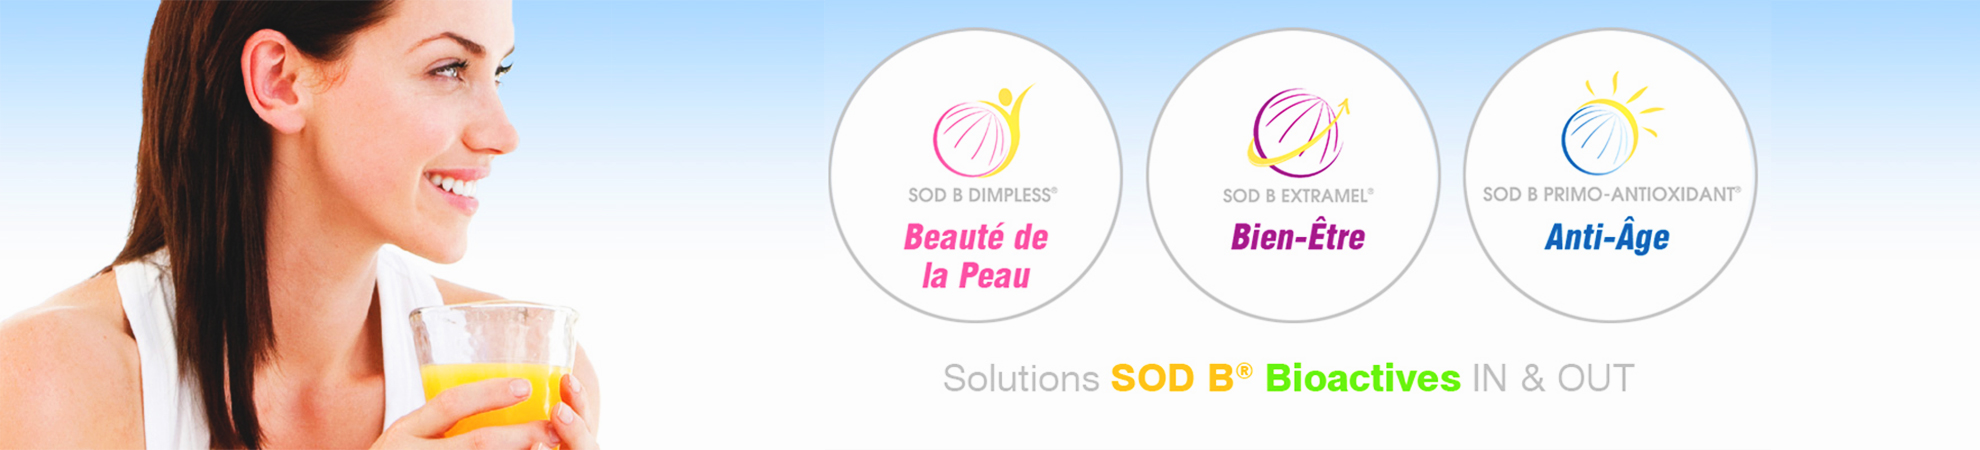 Solutions SOD B bioactives in & out